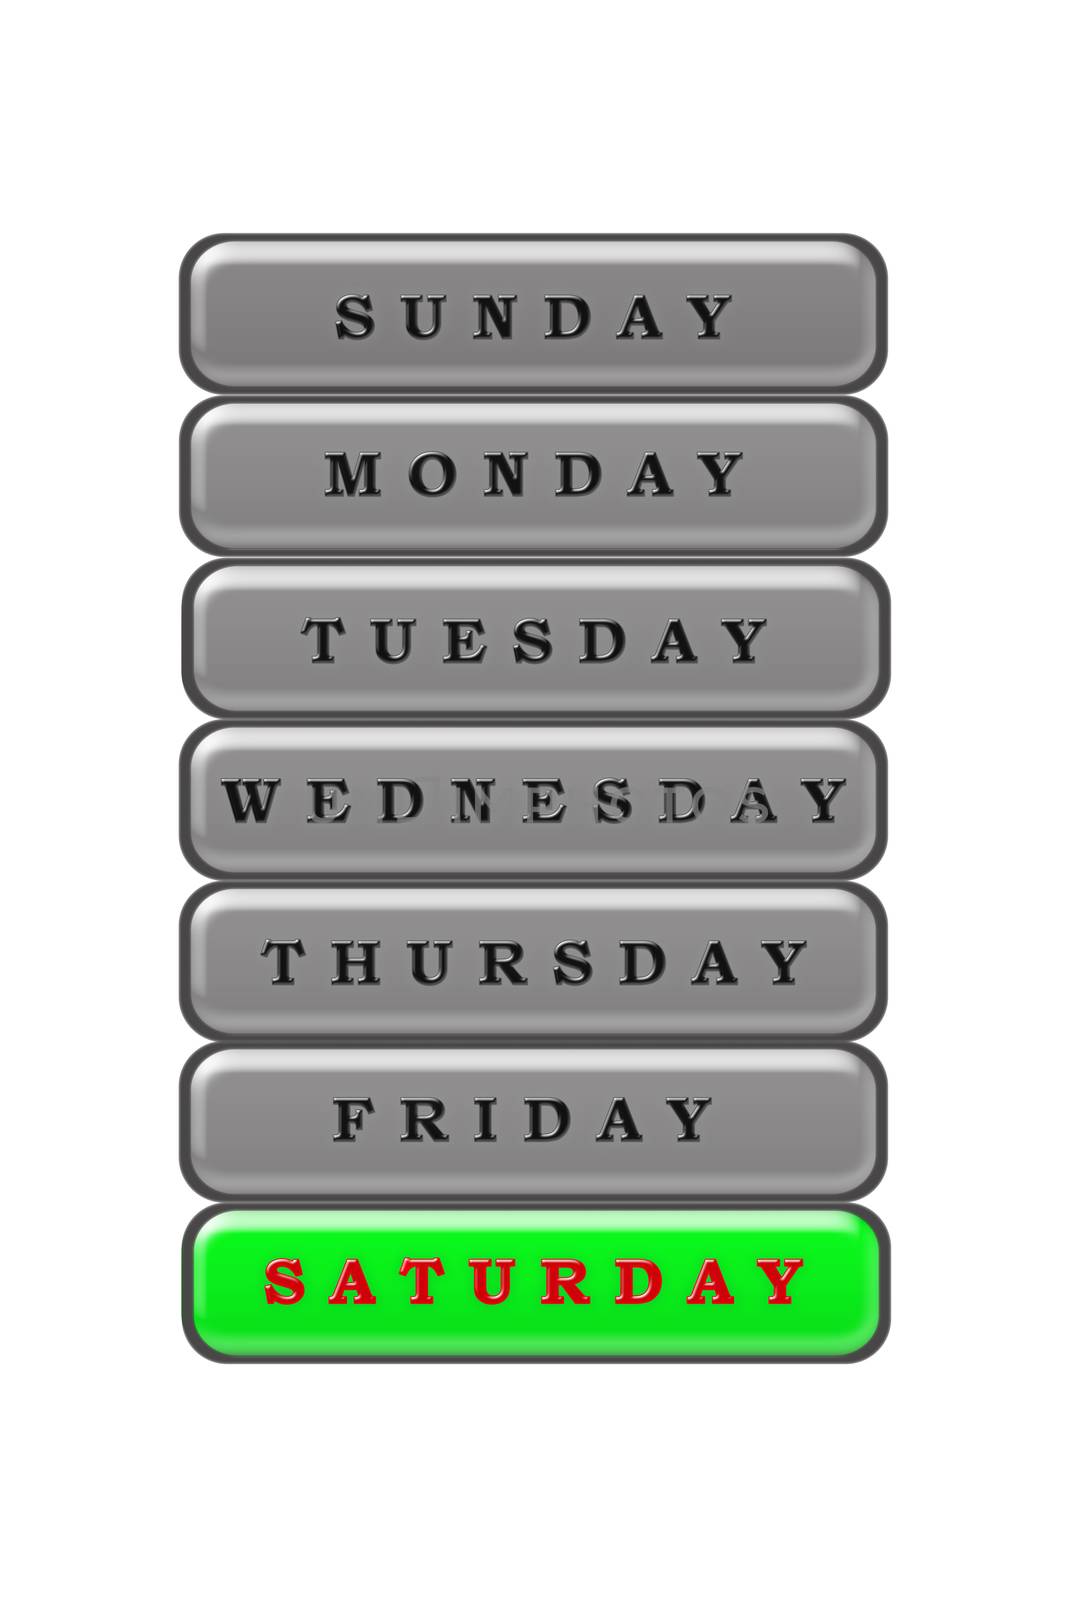 Among the list of days of the week on a green background red highlighted Saturday.  The rest of the days are black on a gray background.